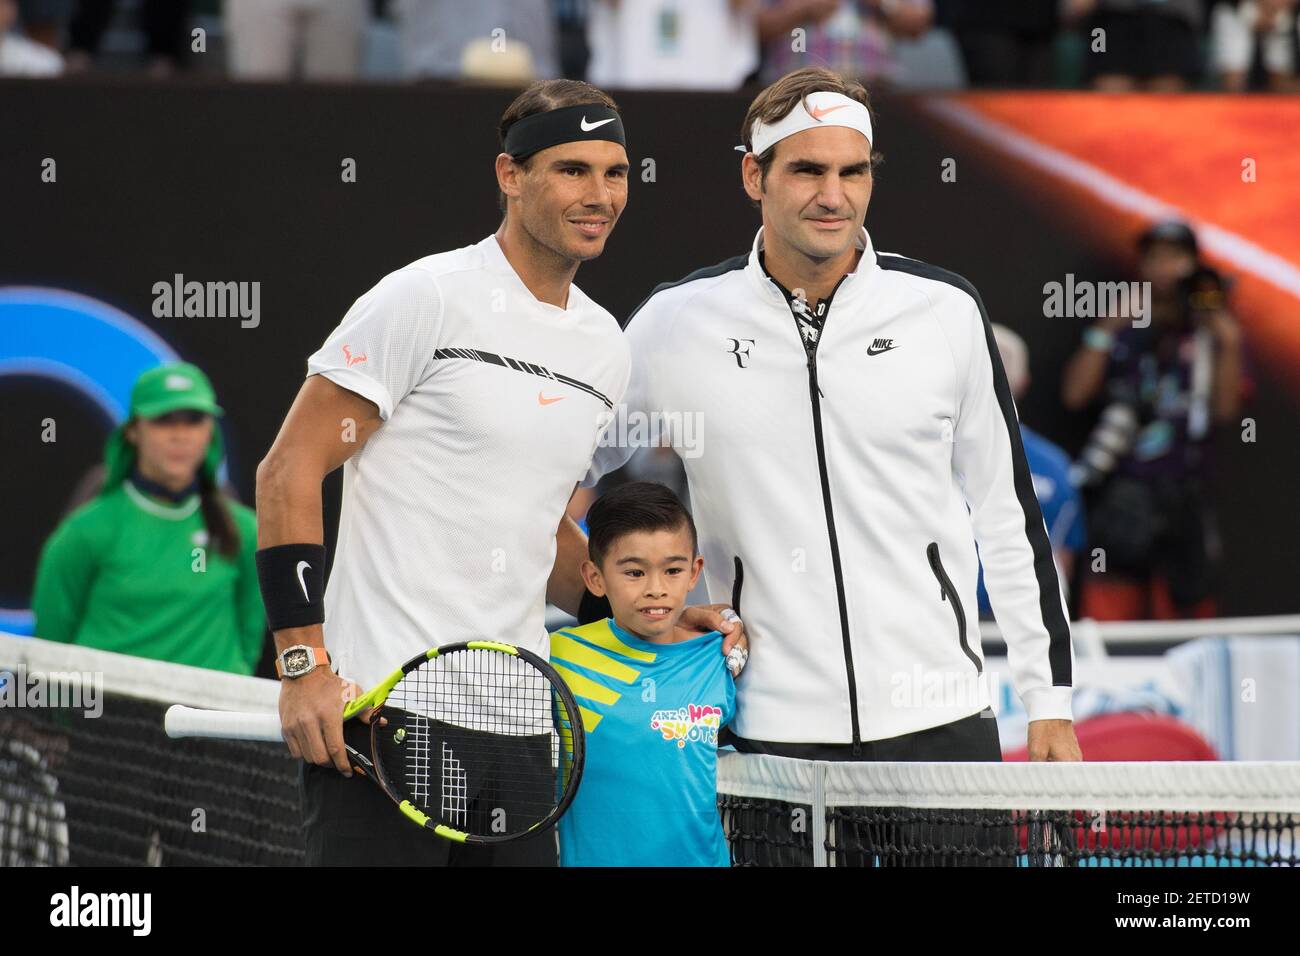 skuffet Slovenien forræderi 170129) -- MELBOURNE, Jan. 29, 2017 (Xinhua) -- Roger Federer (R) of  Switzerland poses for a photo with Rafael Nadal (L) of Spain ahead of their  men's singles final match at the